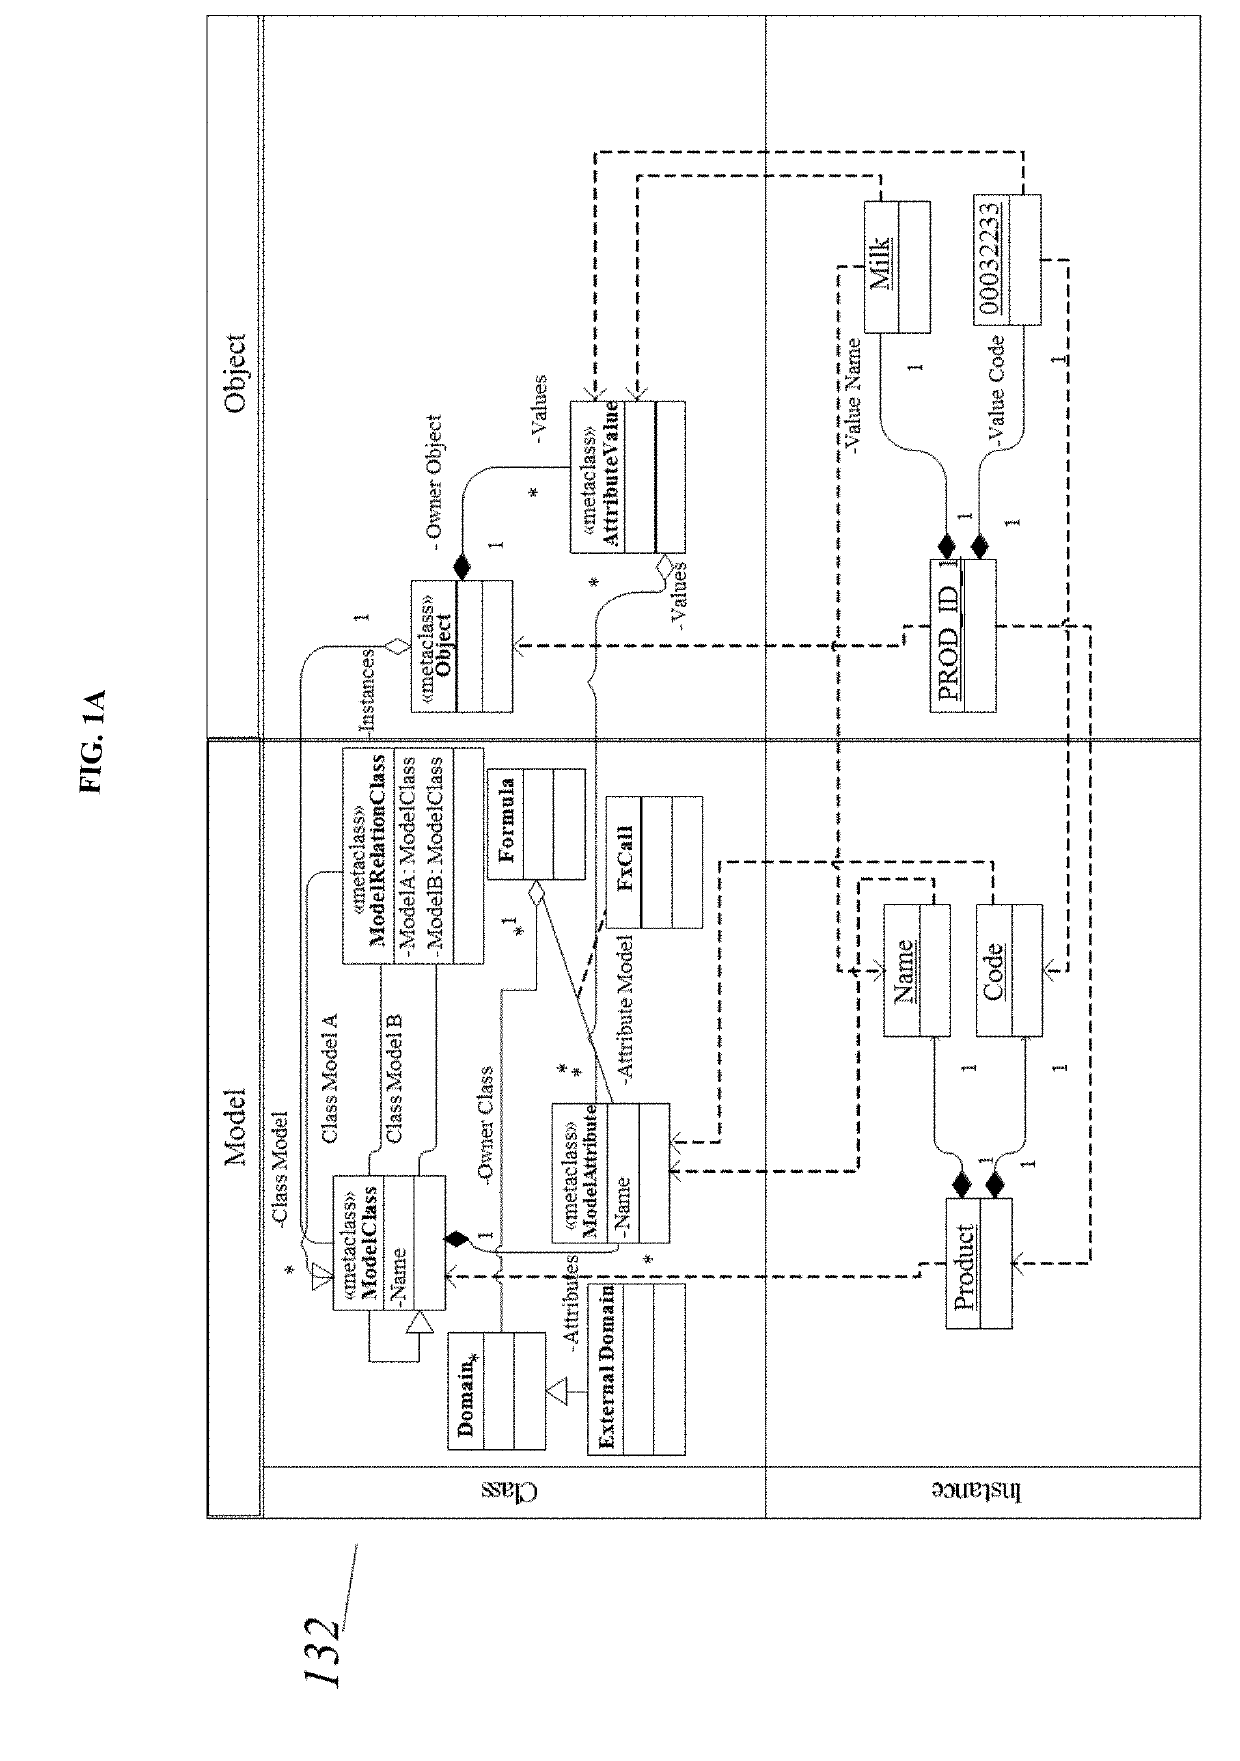 Computer-applied method for displaying software-type applications based on design specifications